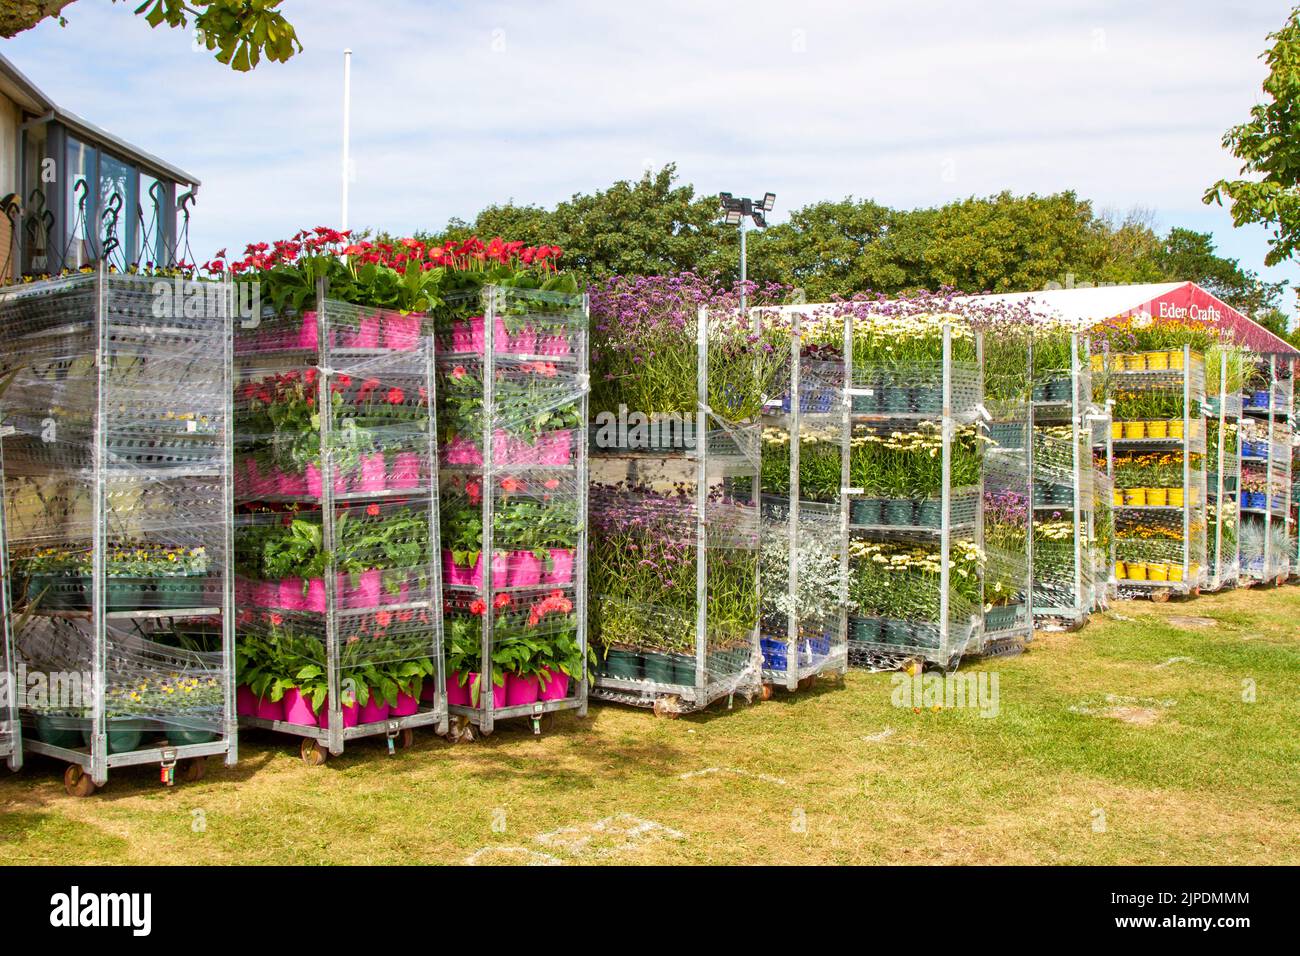 Stacked floral exhibits on garden centre plant container type trolley at Southport Flower Show, Merseyside, UK. Aug 2022:. The largest independent flower show in England is expecting thousands of visitors over the four-day horticultural event. Stock Photo